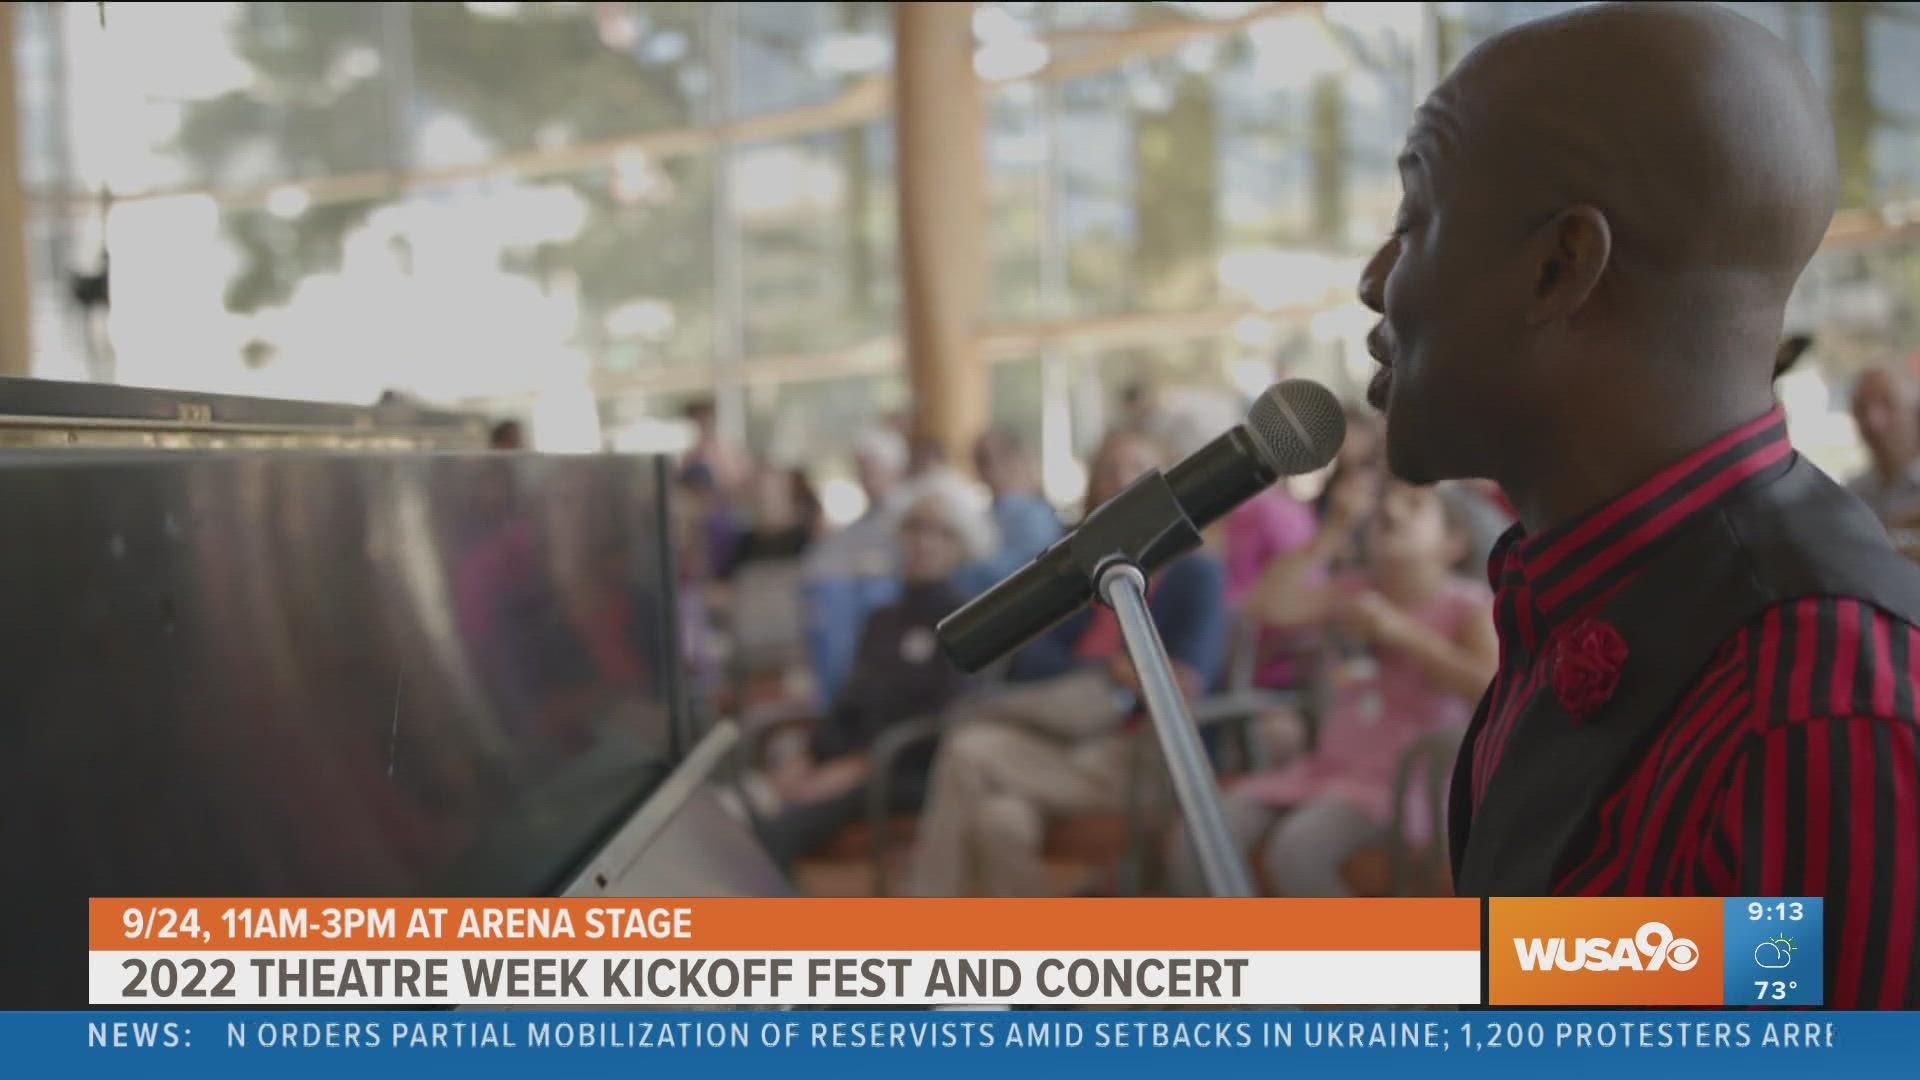 2022 Theatre Week Kickoff Fest & Concert takes place Saturday, September 24th, 2022 at Arena Stage from 11 am to 3 pm.